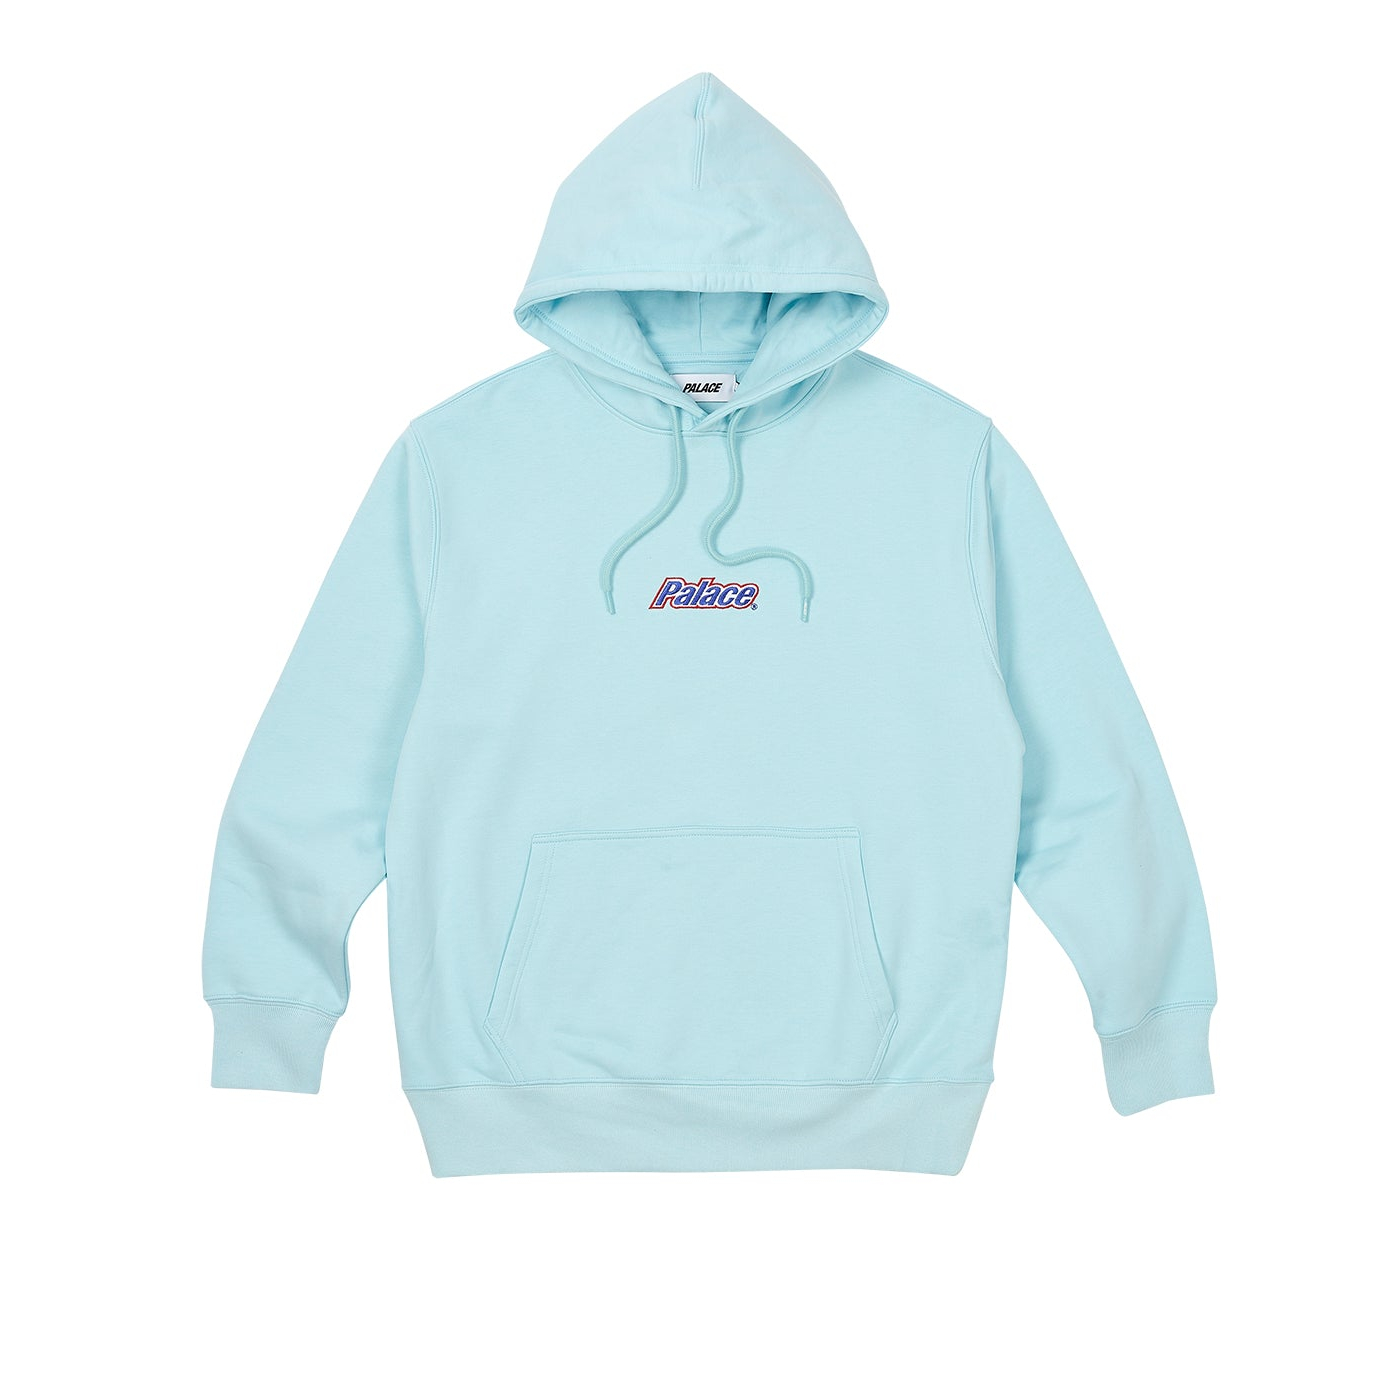 Thumbnail CURRENT HOOD CRYSTALISED BLUE one color